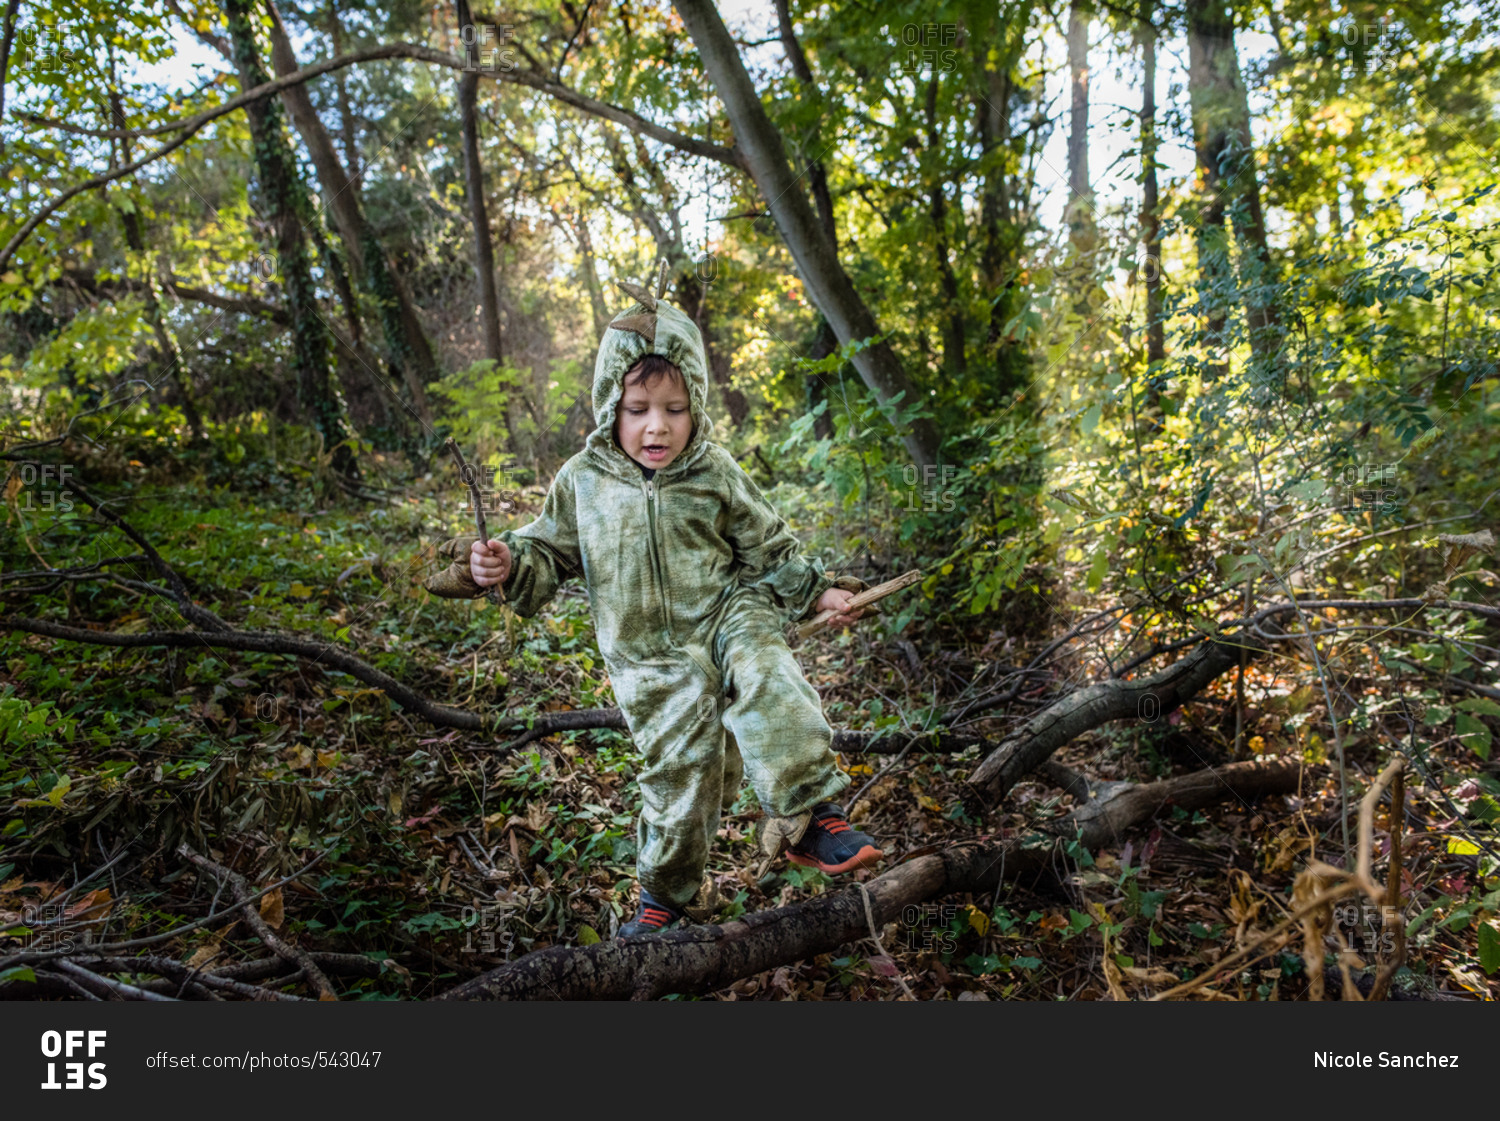 Little boy in a dinosaur costume playing on a log in the forest